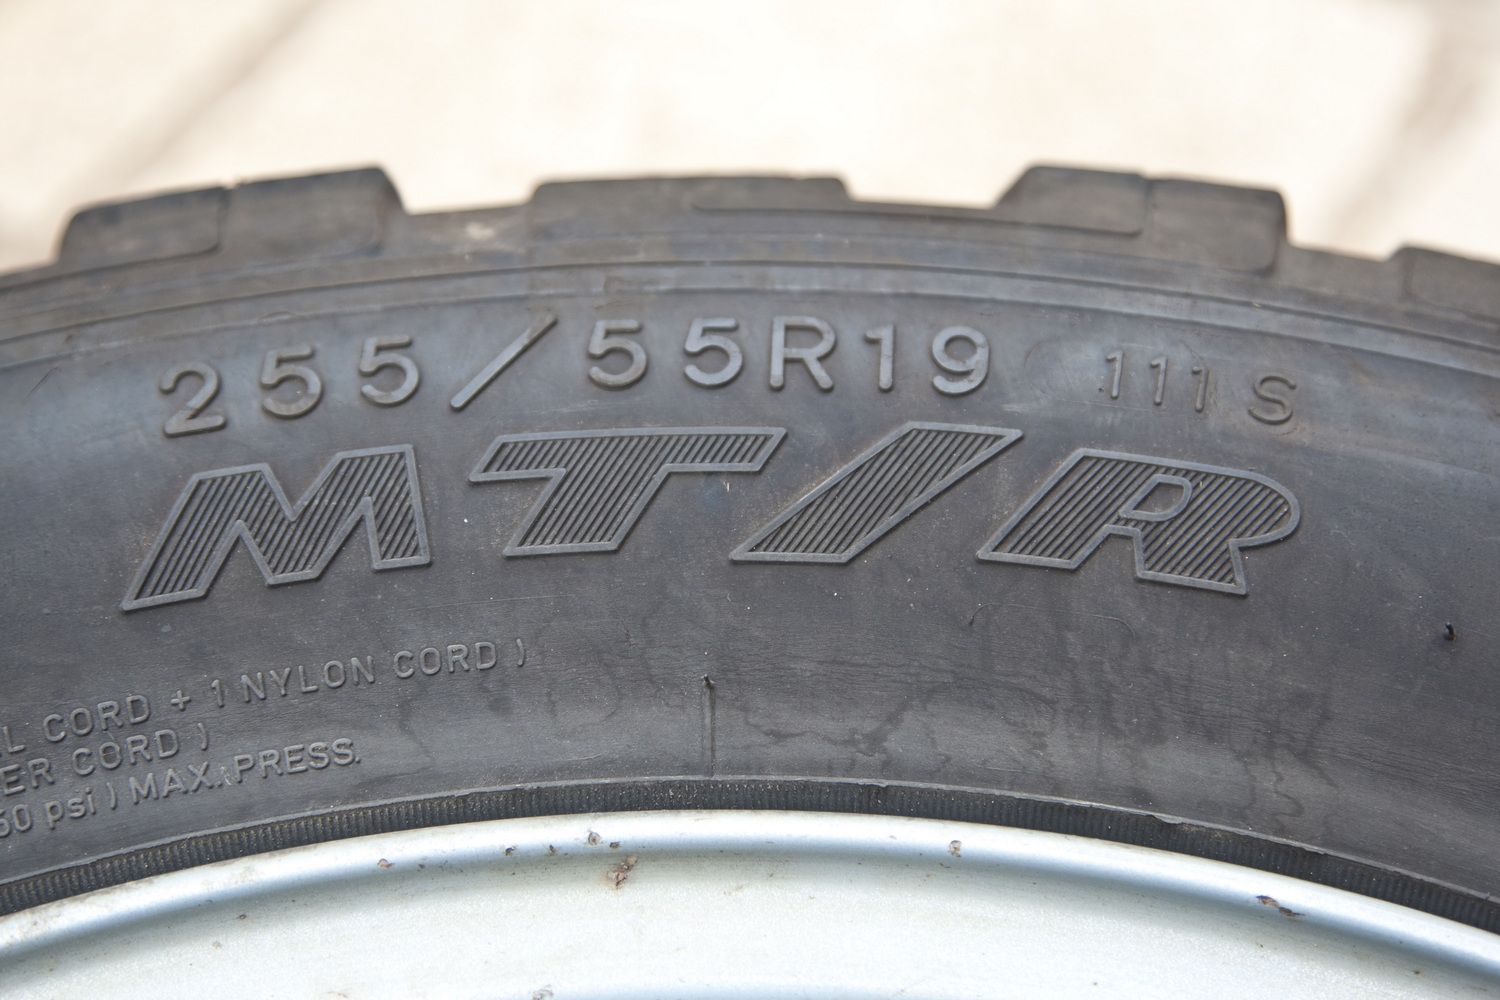 I can’t find appropriately speed-rated tyres for my 4×4 in Australia!